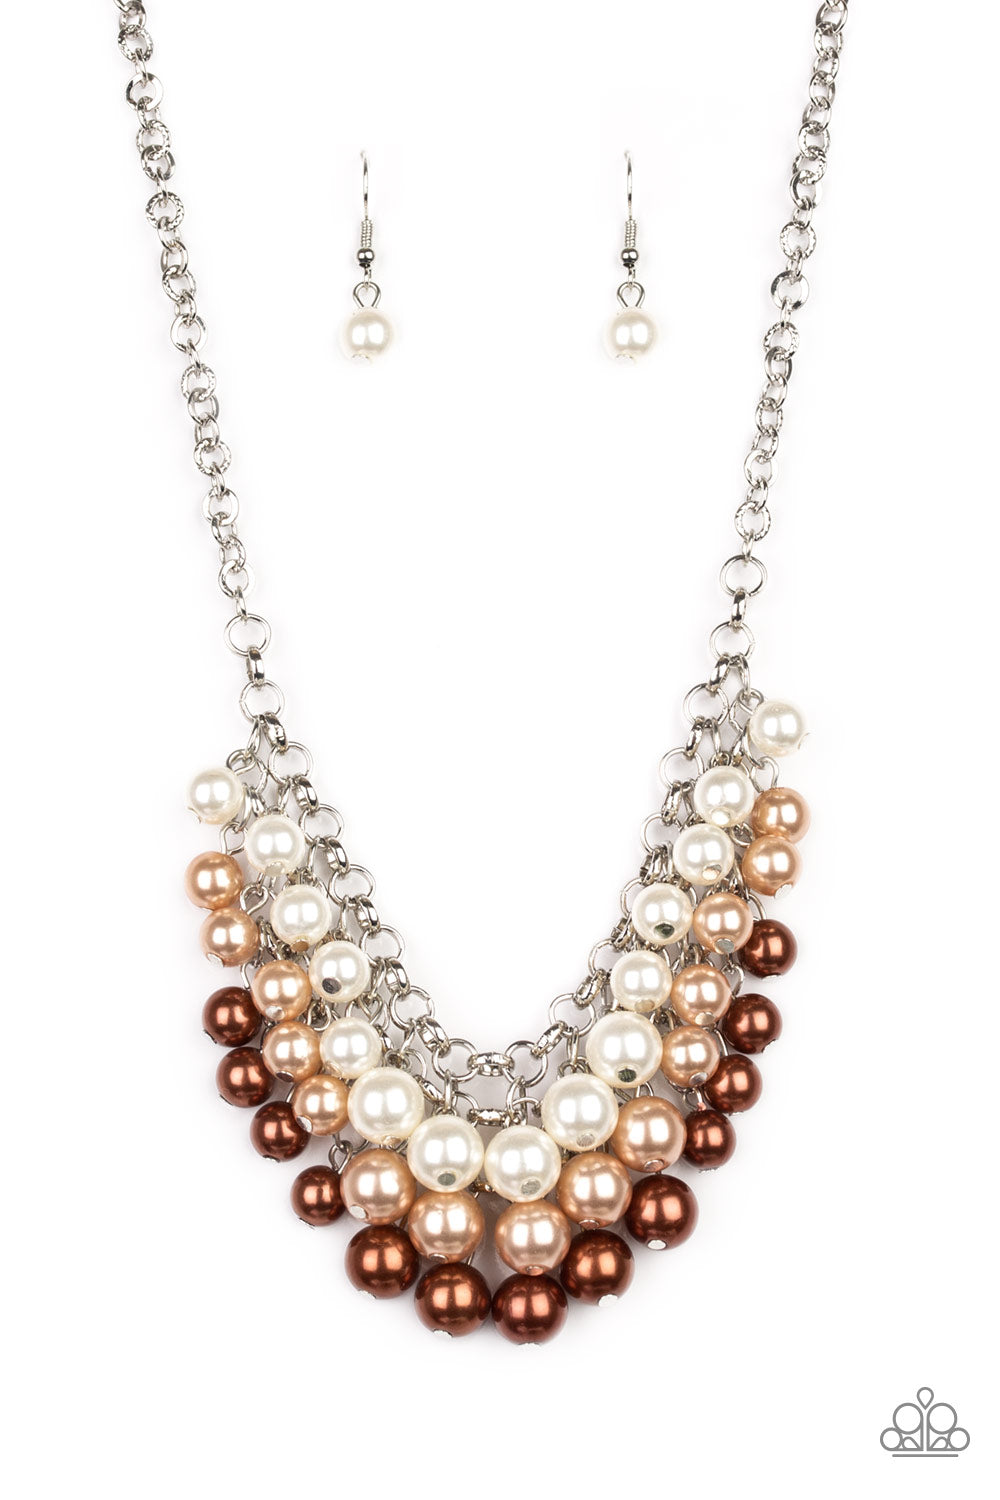 Paparazzi necklace - Run For The HEELS! - Brown